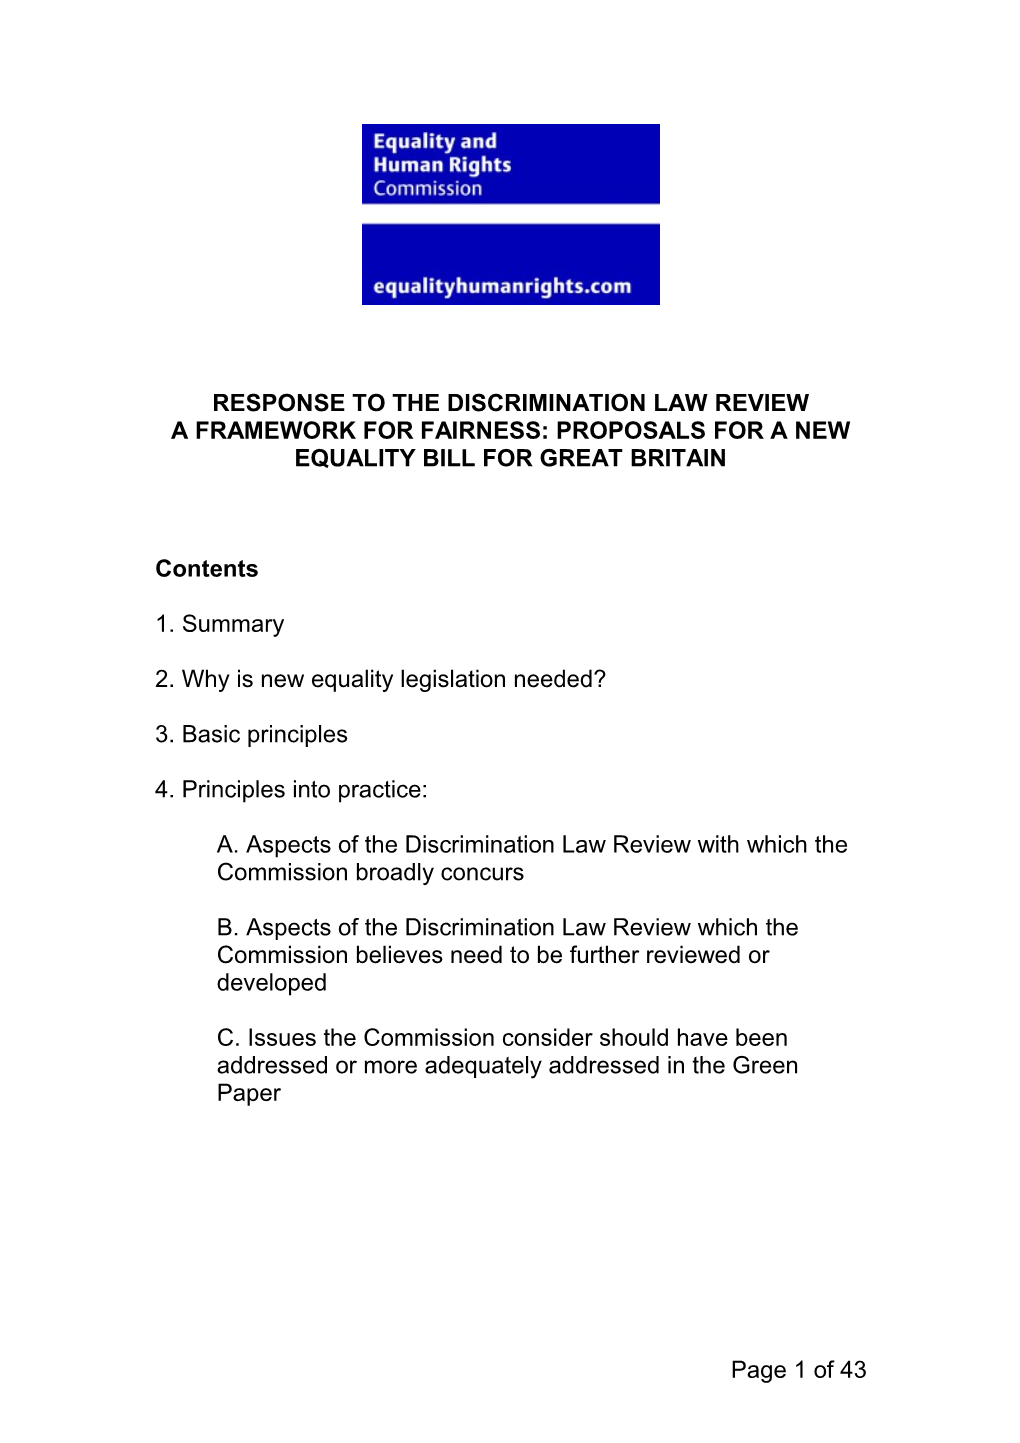 Equality and Human Rights Commission's Response to the Discrimination Law Review